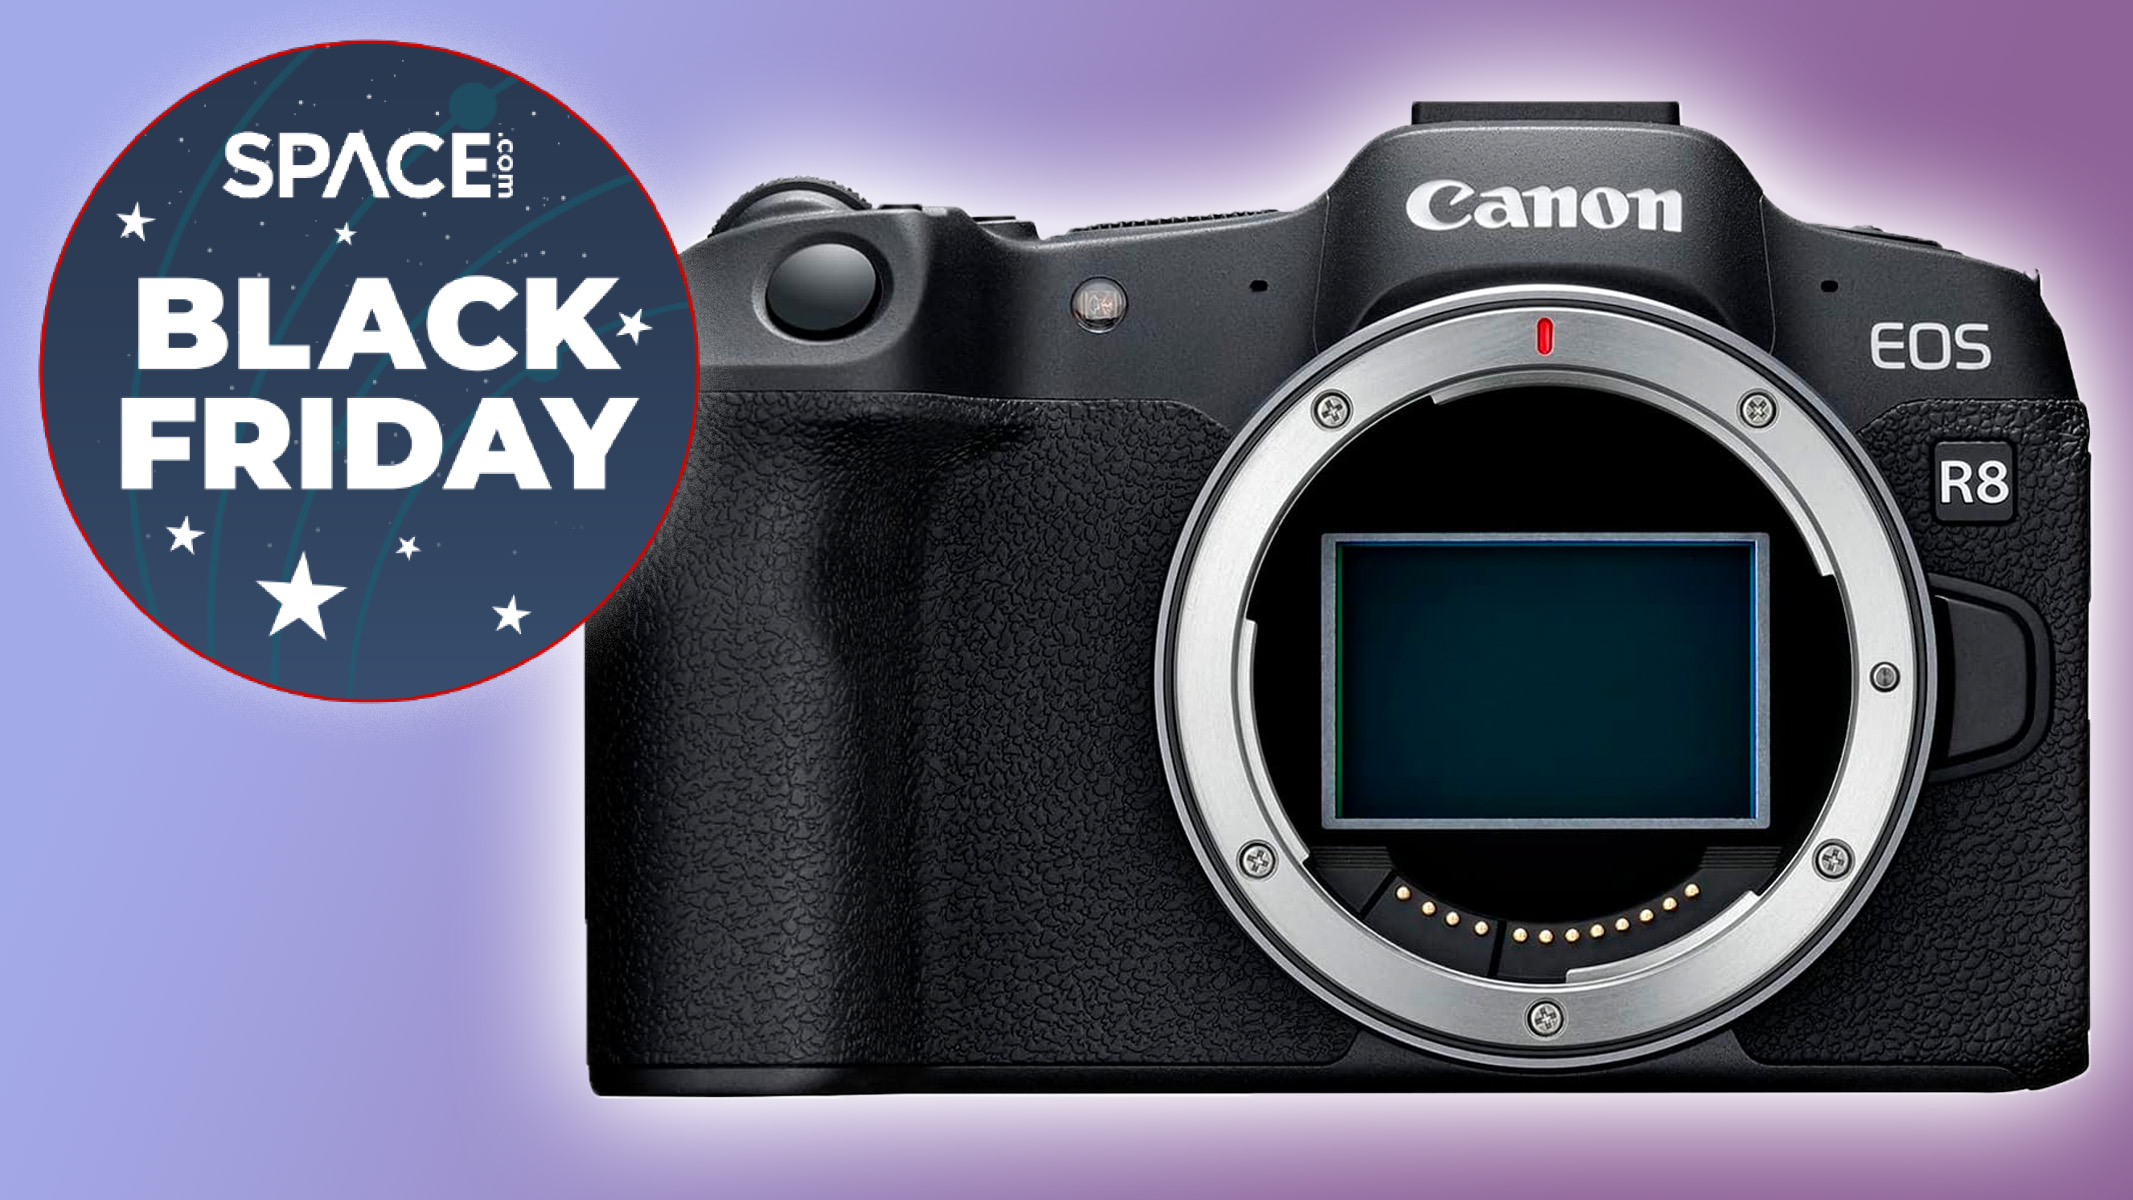 Save $300 on Canon EOS R8 mirrorless camera in this Black Friday camera deal Space